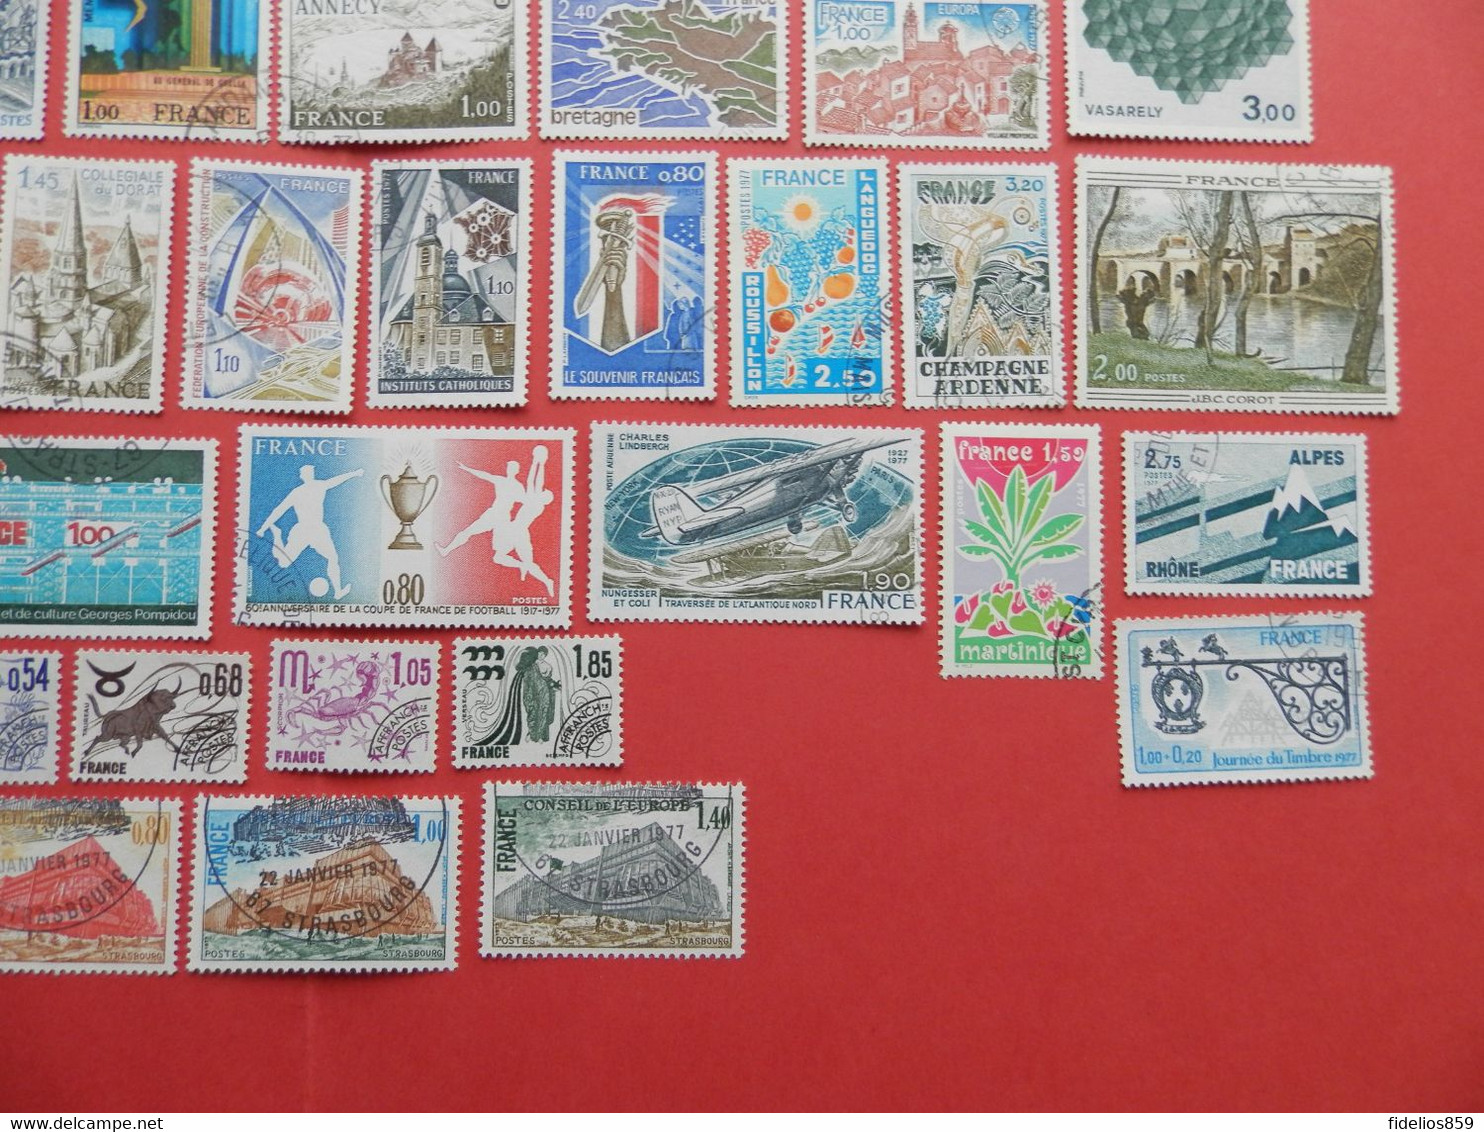 FRANCE OBLITERES LUXE : ANNEE COMPLETE 1977 SOIT 48 TIMBRES POSTE DIFFERENTS + PA 50 + PREOS 146/49 + SERVICE 53/55 - 1970-1979